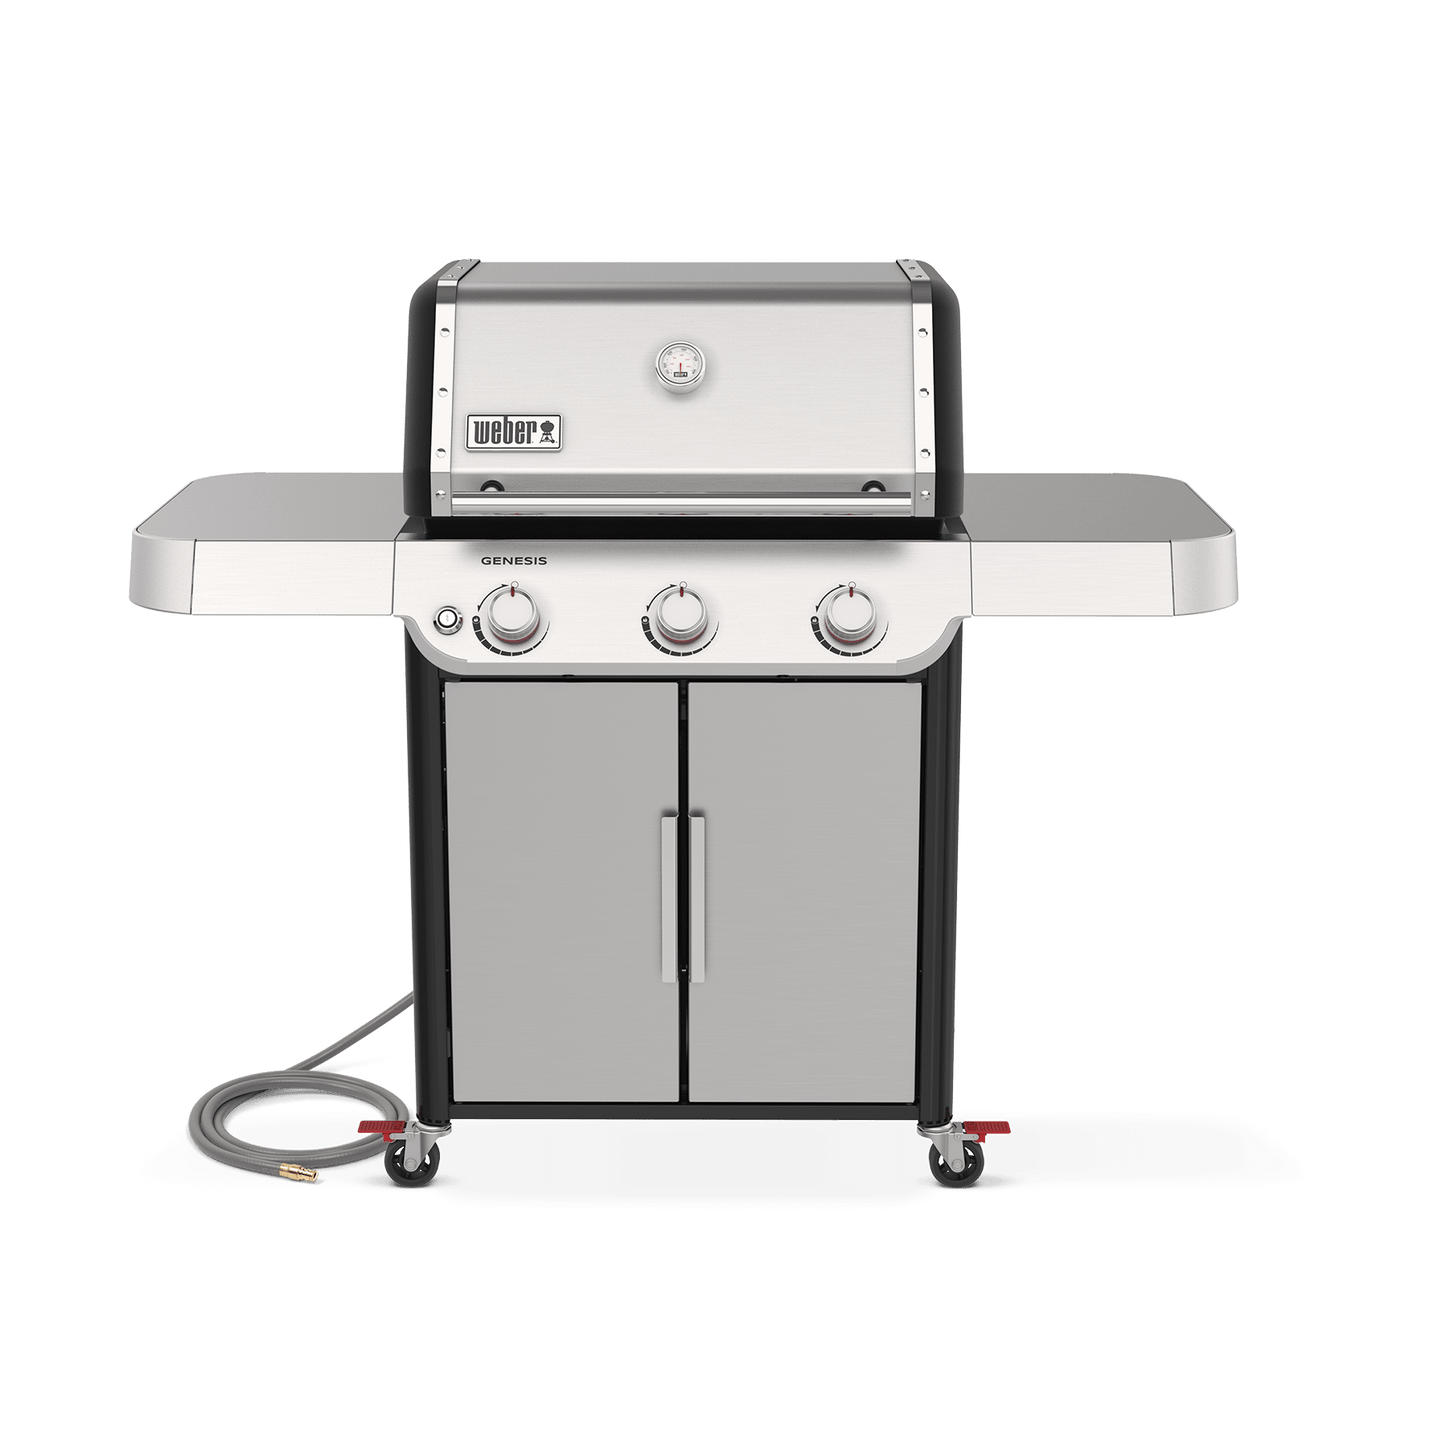 Weber 1500569 Genesis S-315 Gas Grill (Natural Gas) - Stainless Steel